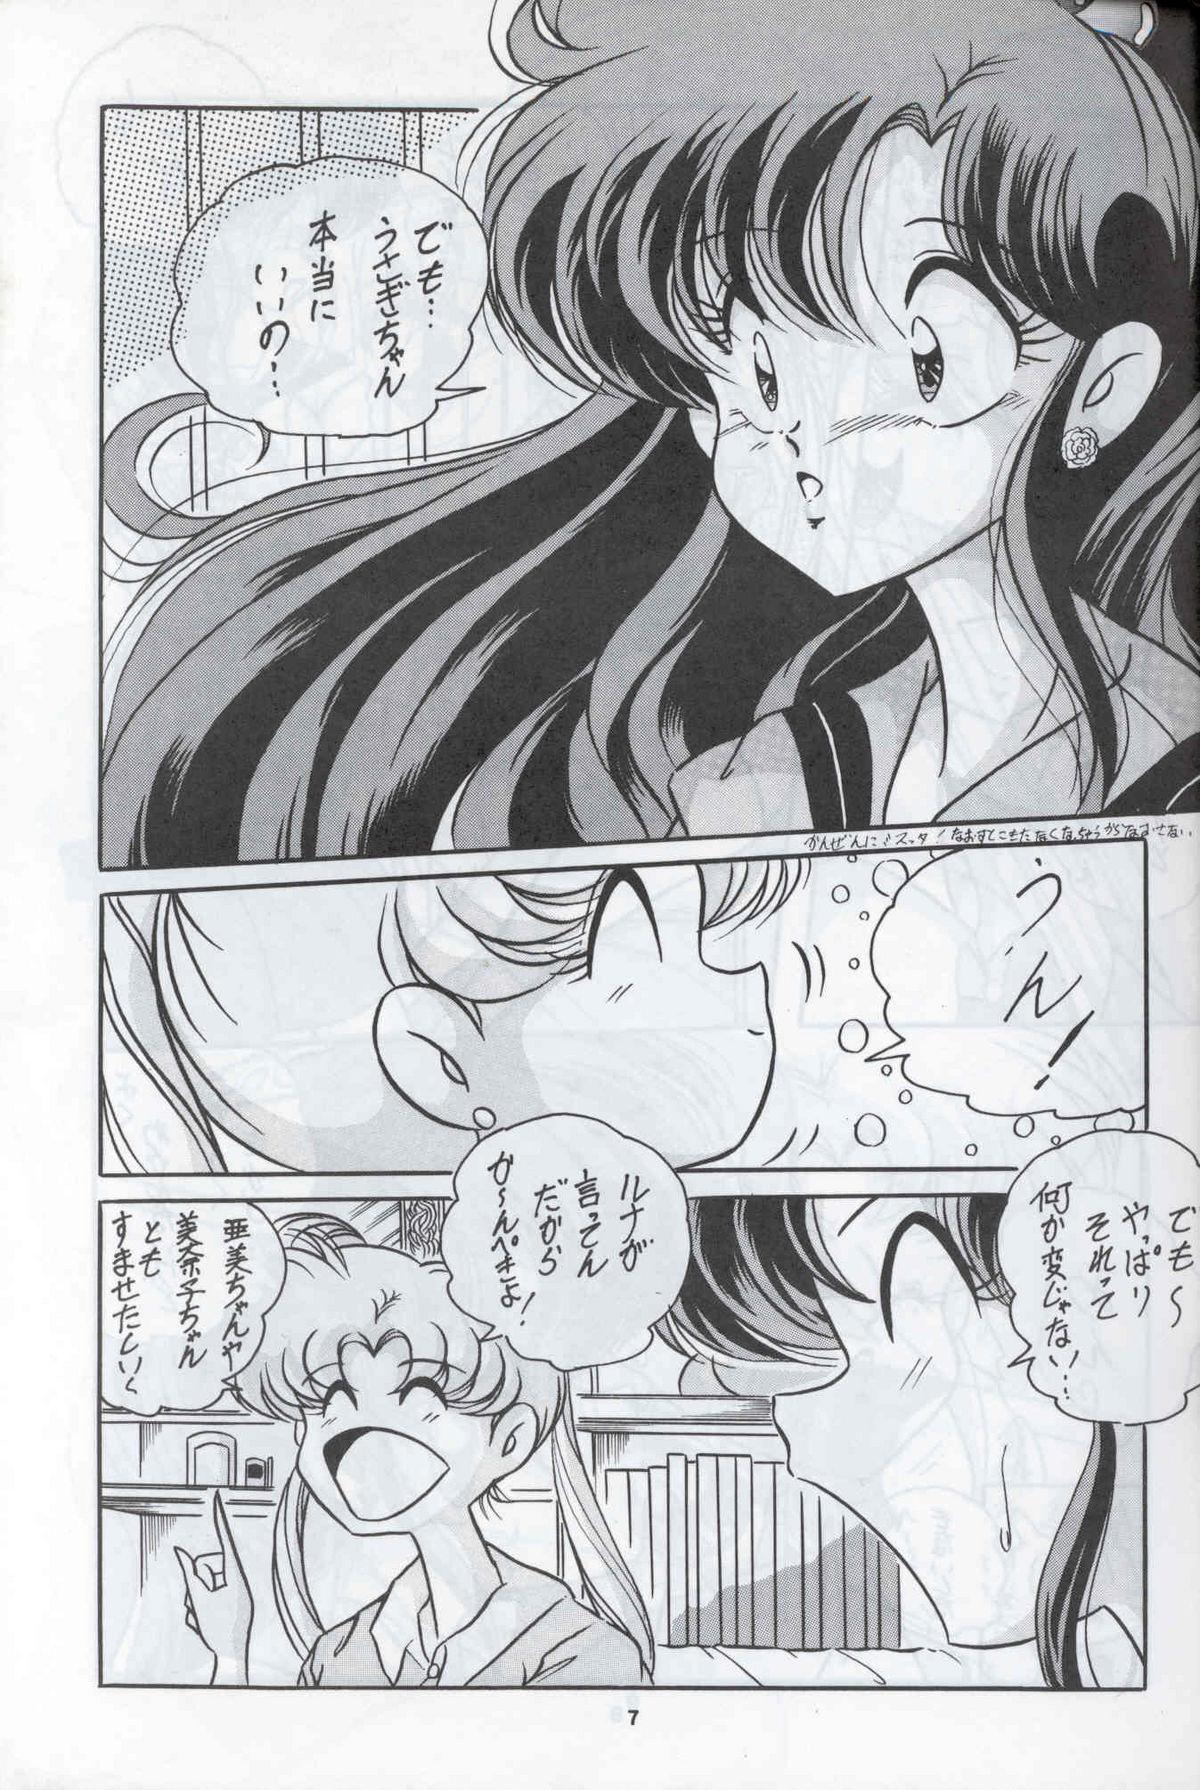 Best Blowjobs C-COMPANY SPECIAL STAGE 12 - Sailor moon Ranma 12 Urusei yatsura Dirty - Page 8